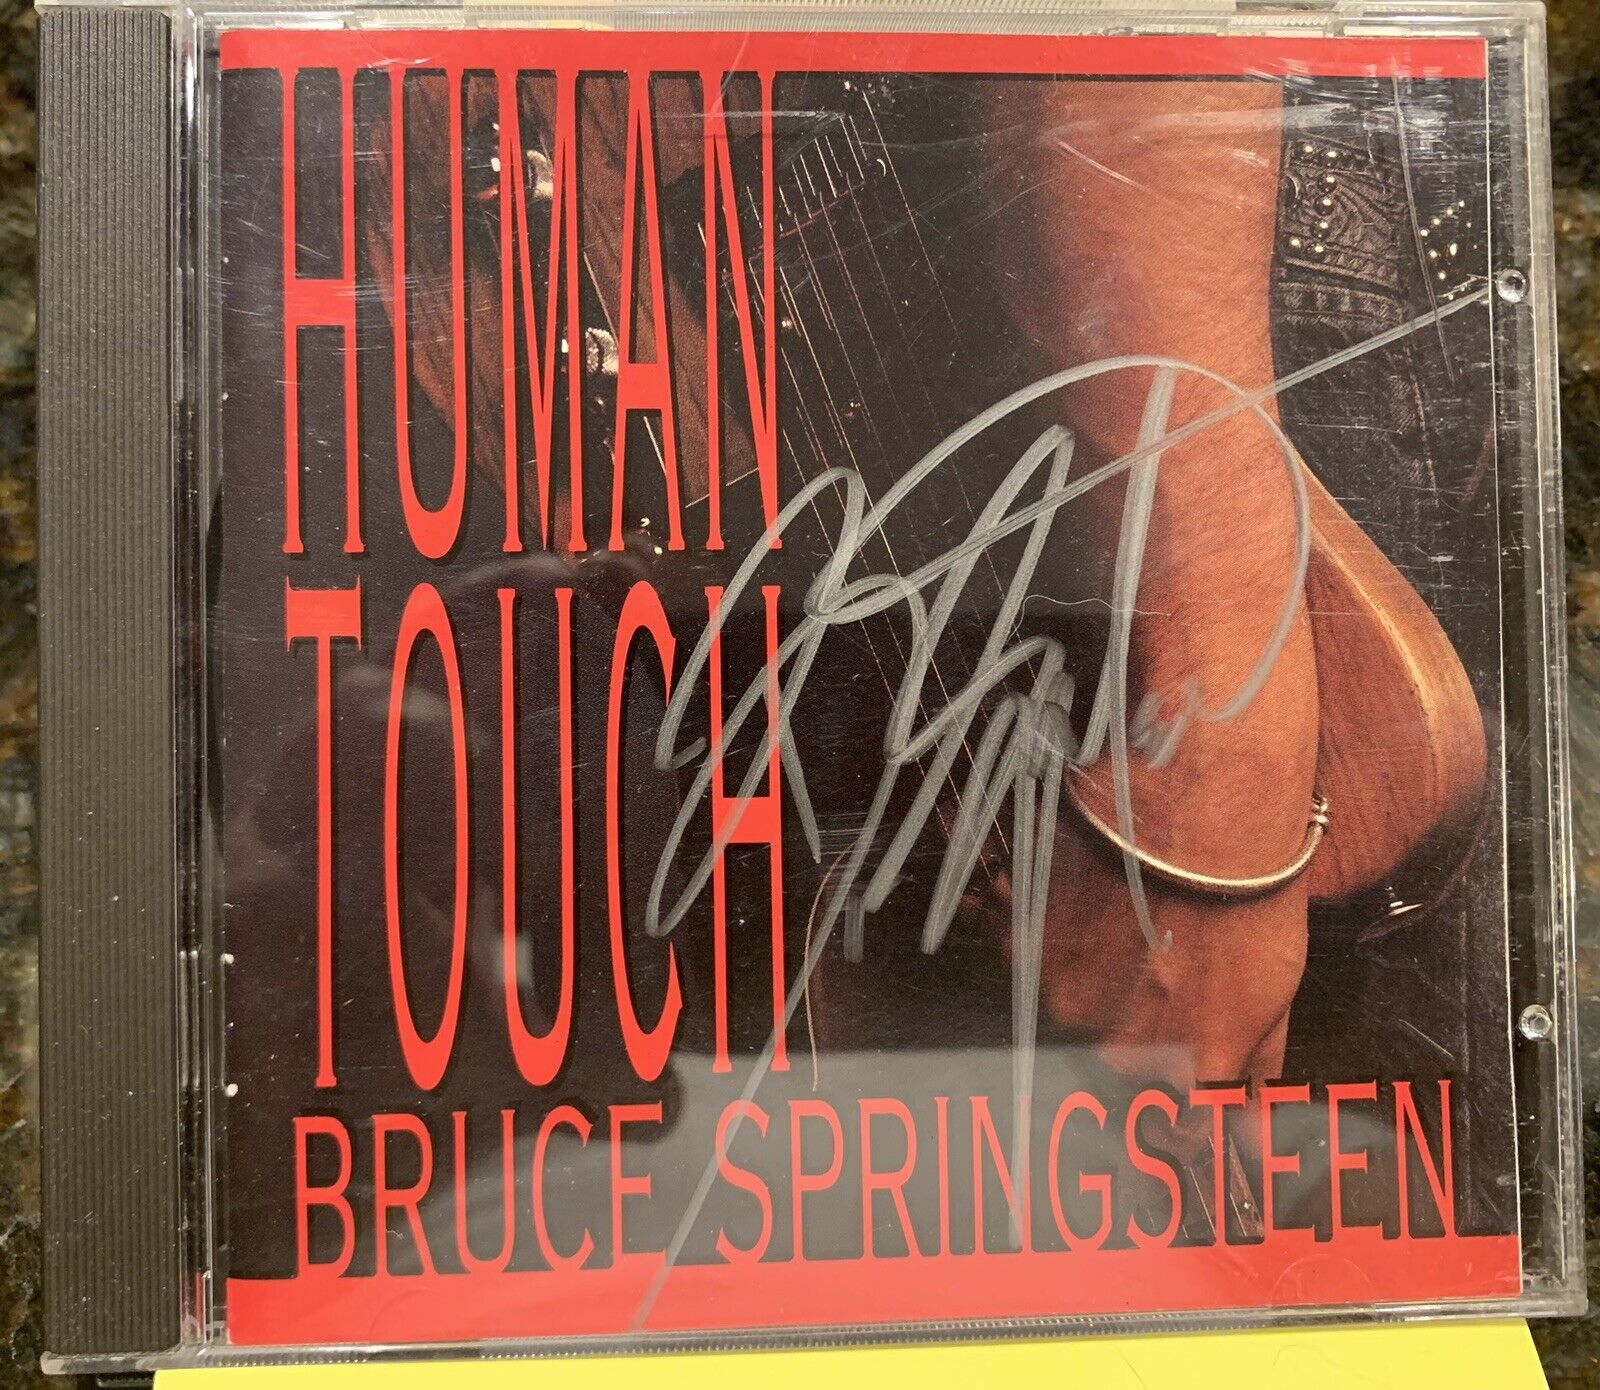 Bruce Springsteen Autographed CD of the Human Touch